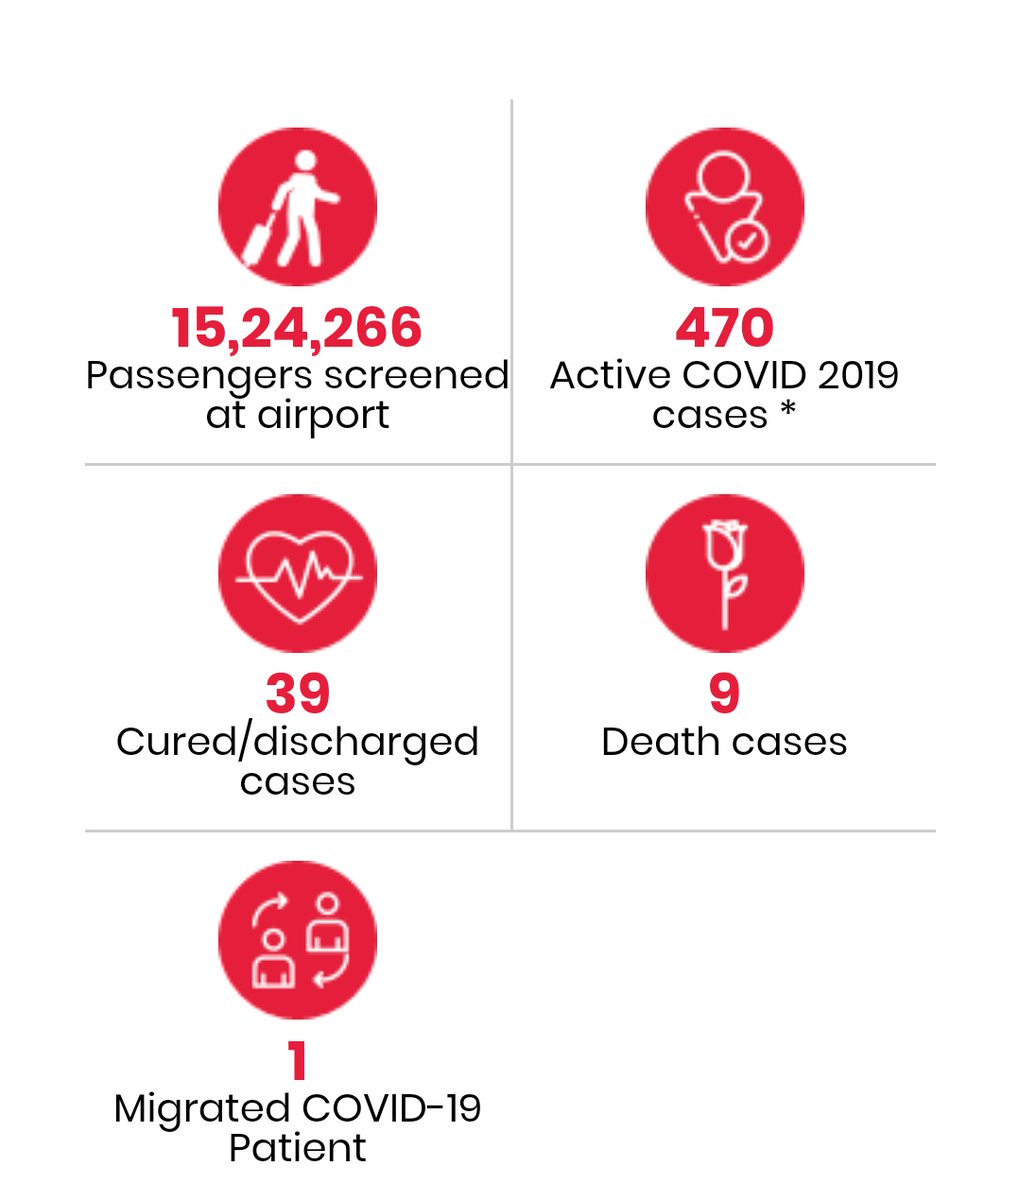 519 positives with 470 active covid-19 cases according to  @MoHFW_INDIA latest update.5 more discharged, no new deaths.